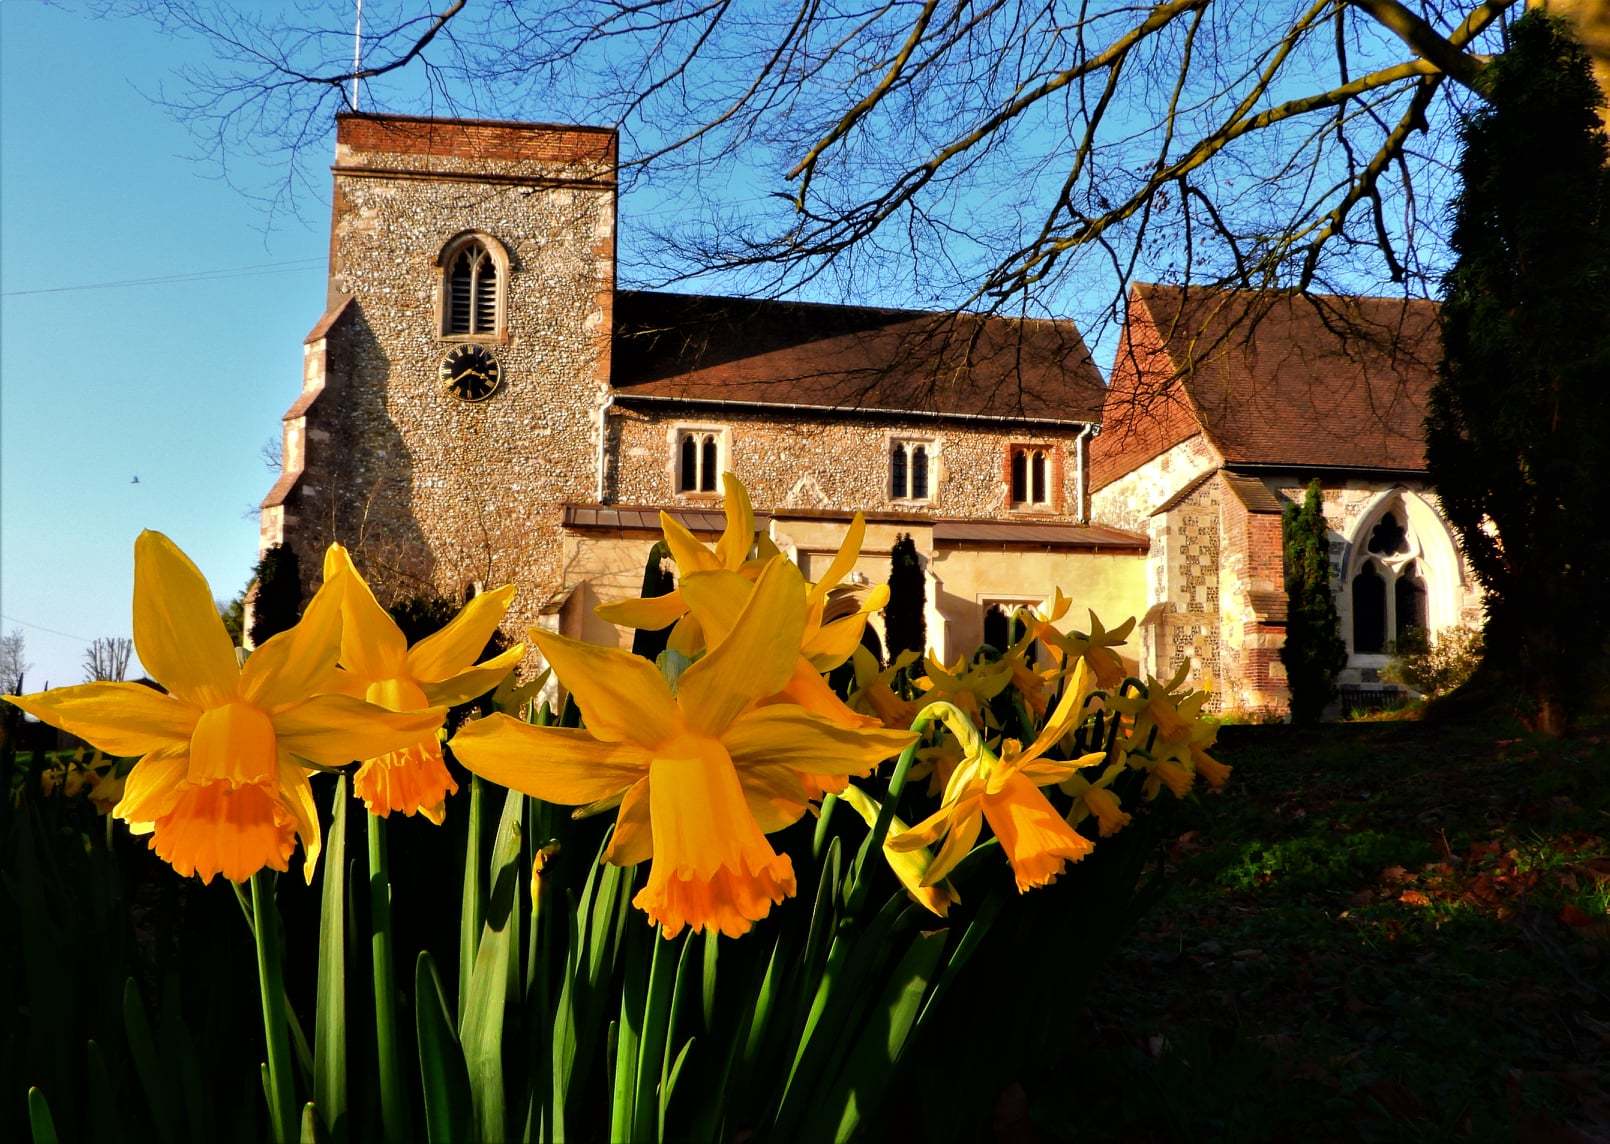 St Lawrence, Abbots Langley. Credit: Stephen Danzig